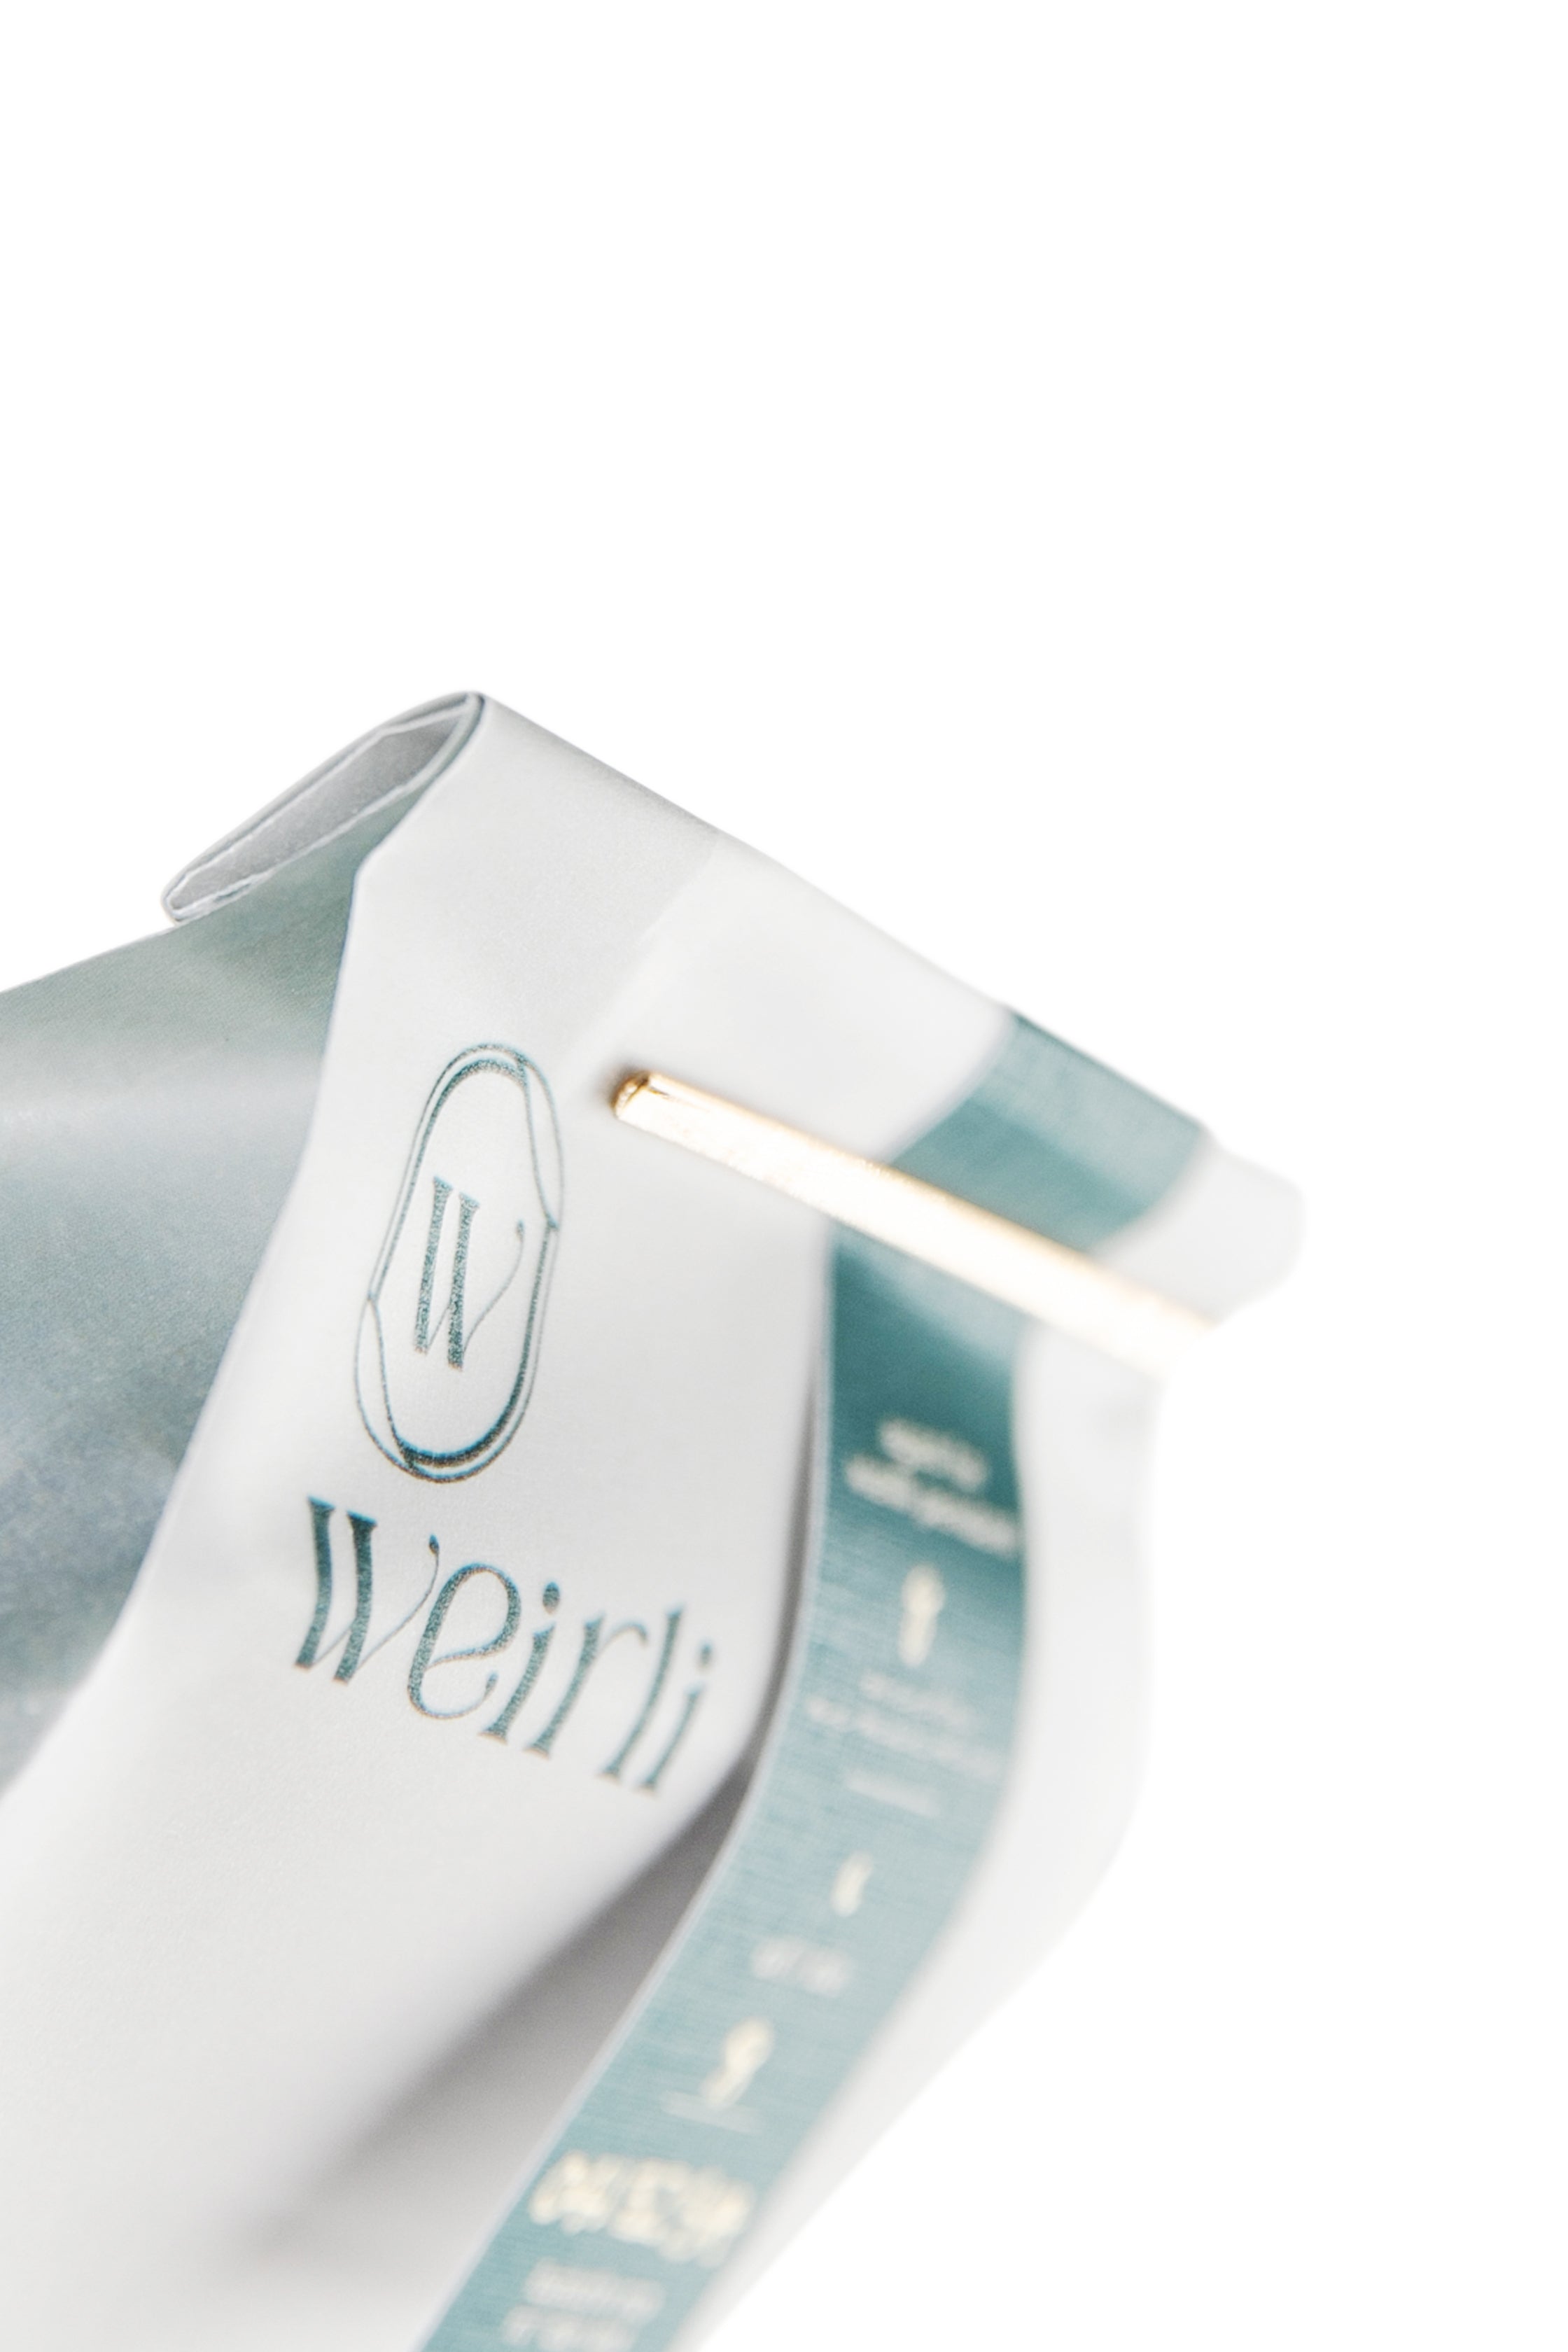 Snippet of product packaging from Weirli